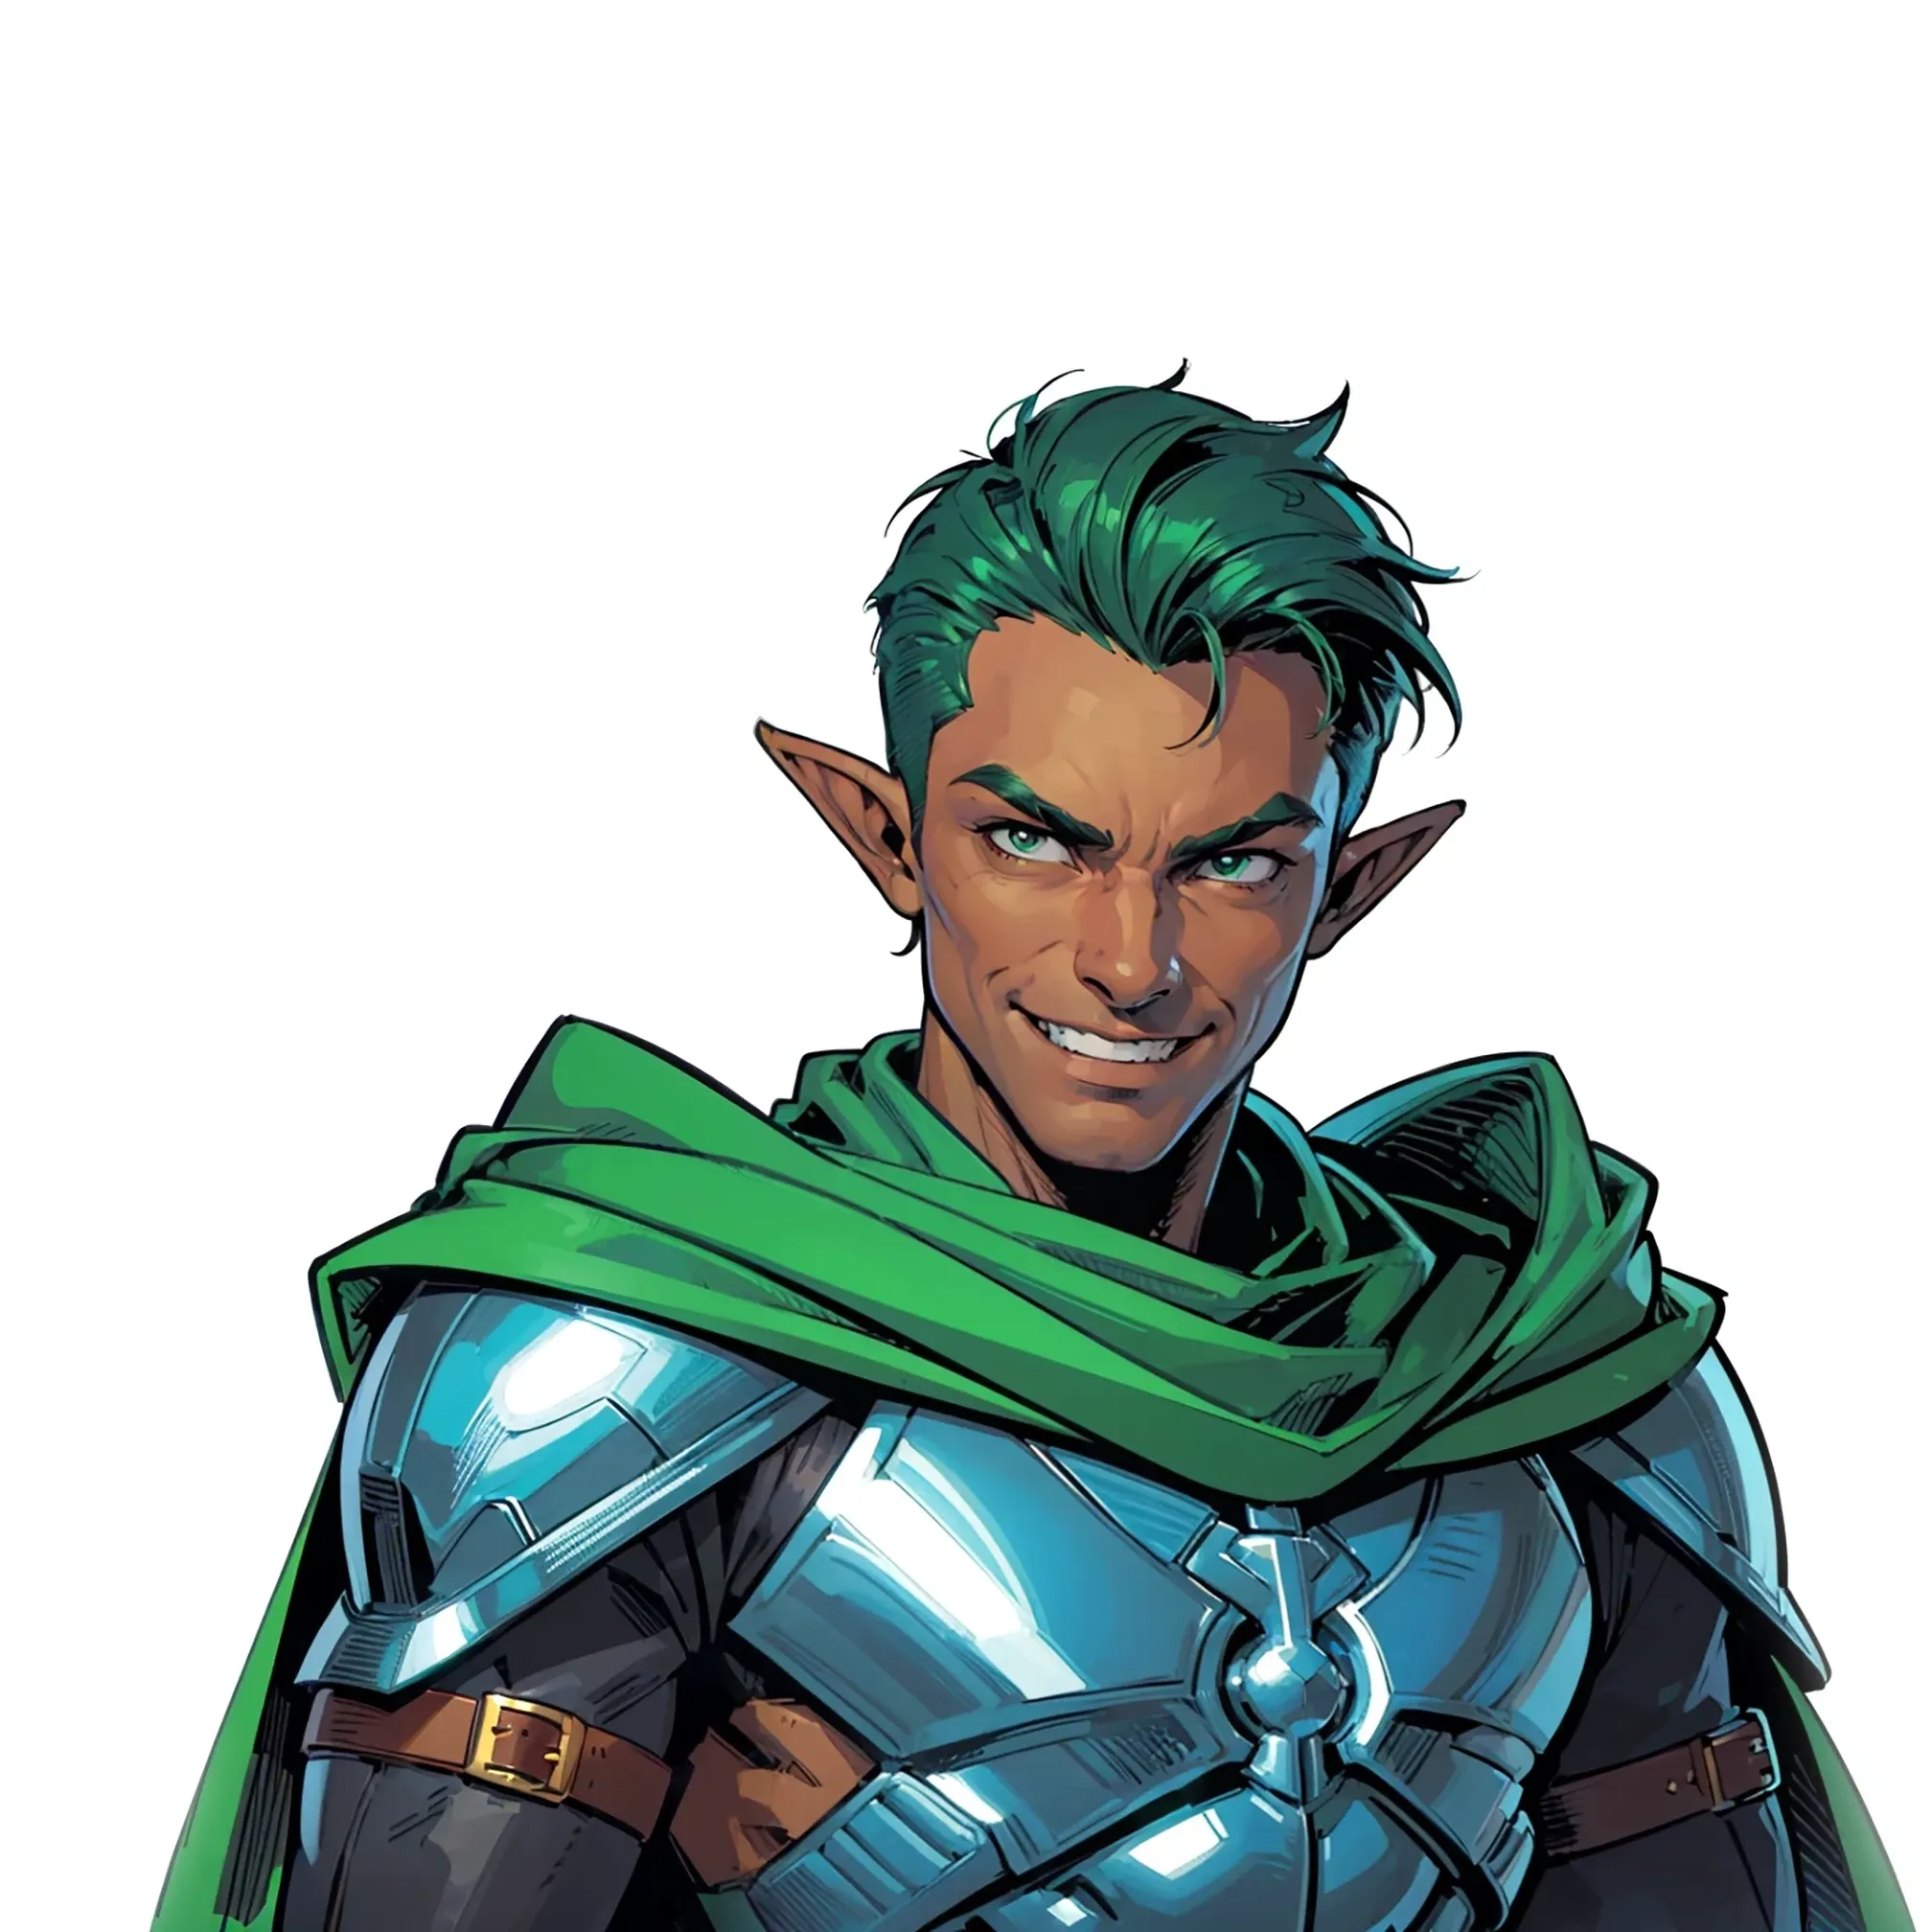 Evil smile cartoon fantasy elf paladin posing in shiny armor with green and cyan tones